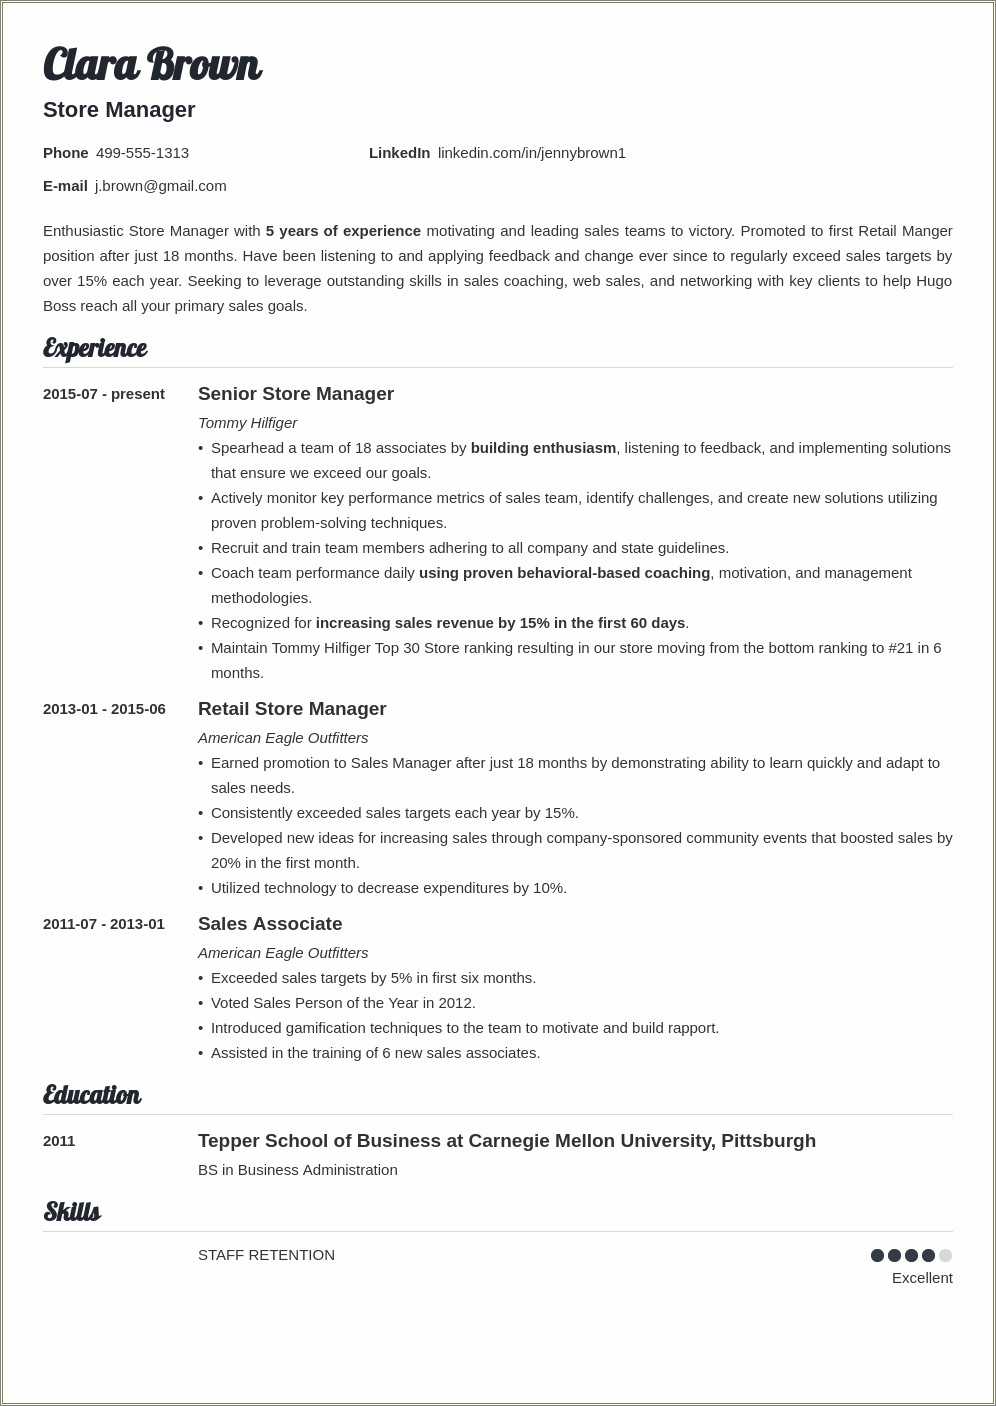 Grocery Store Manager Resume Example - Resume Example Gallery